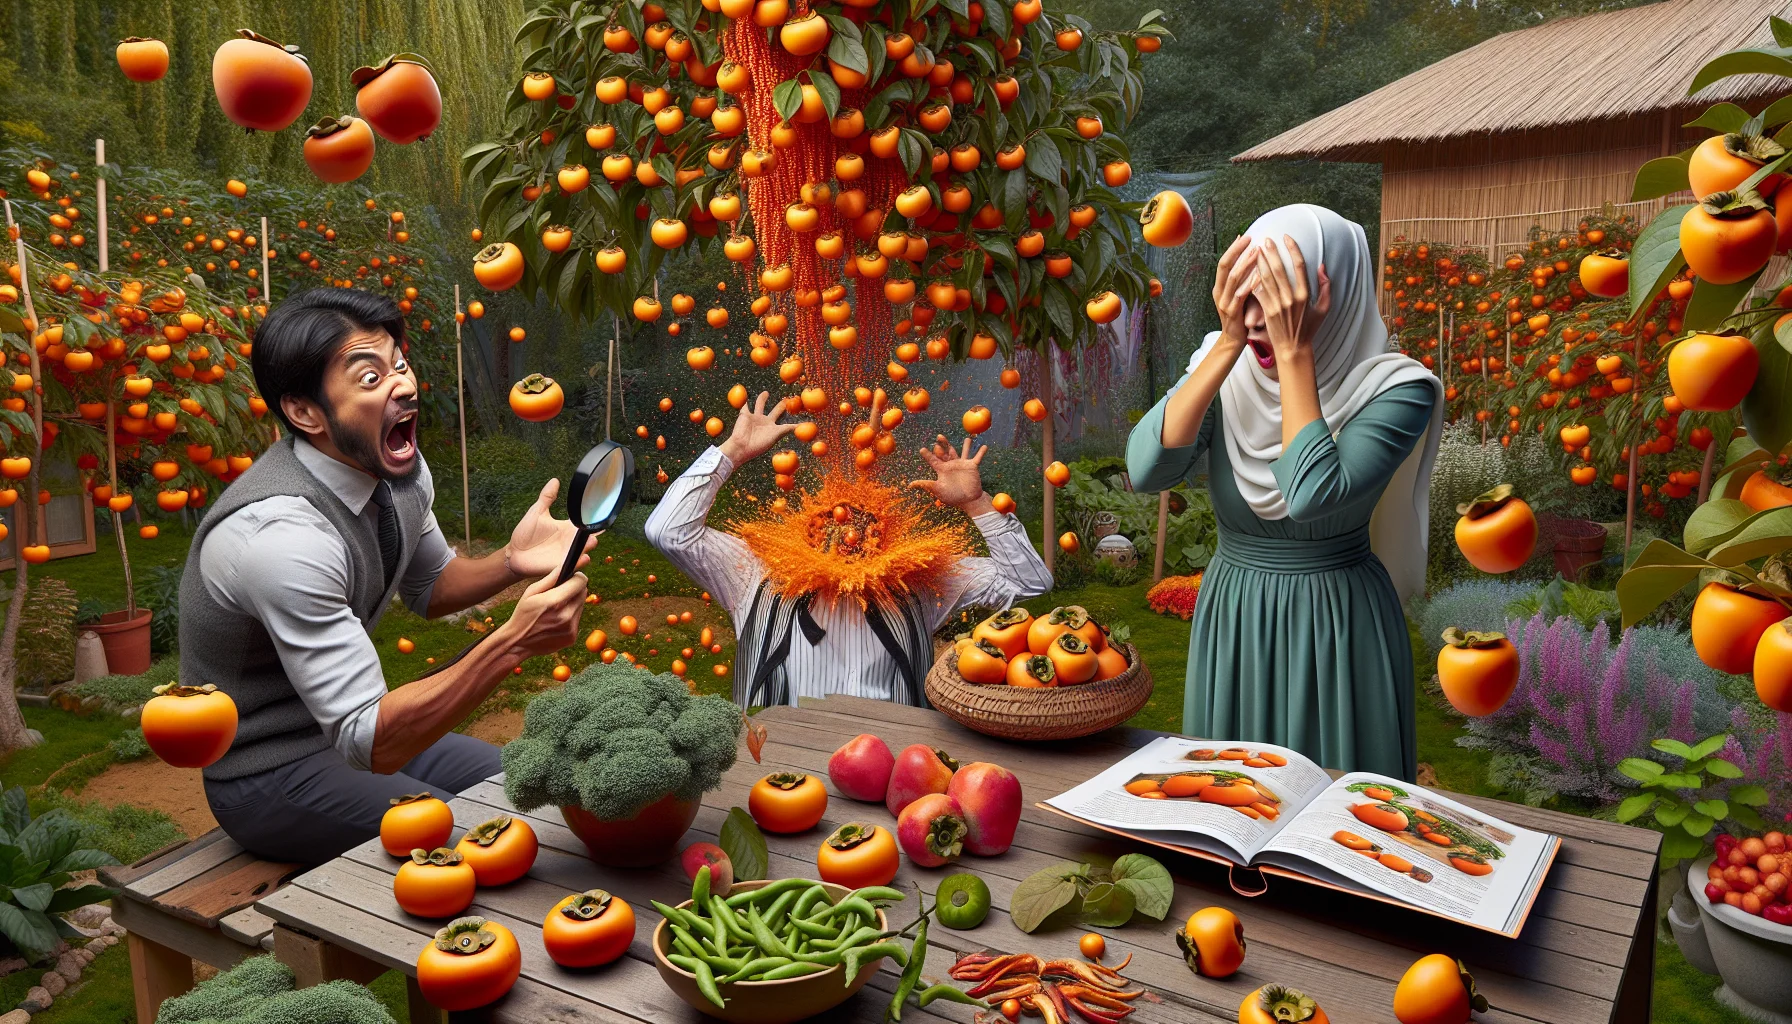 Envision a hilarious scene in a lush garden, bursting with color. In the center is a Middle-Eastern woman smacking her forehead in an 'ah-ha' moment, surrounded by a cascade of just-fall orange persimmons from a nearby tree. She holds a magnifying glass and an open, detailed guidebook on when persimmons are ripe. Meanwhile, a South Asian man is off to the side, about to taste a persimmon for the first time, with an expression of wide-eyed anticipation. The garden environment is filled with various plants and vegetables, promoting the joys and surprises of gardening.